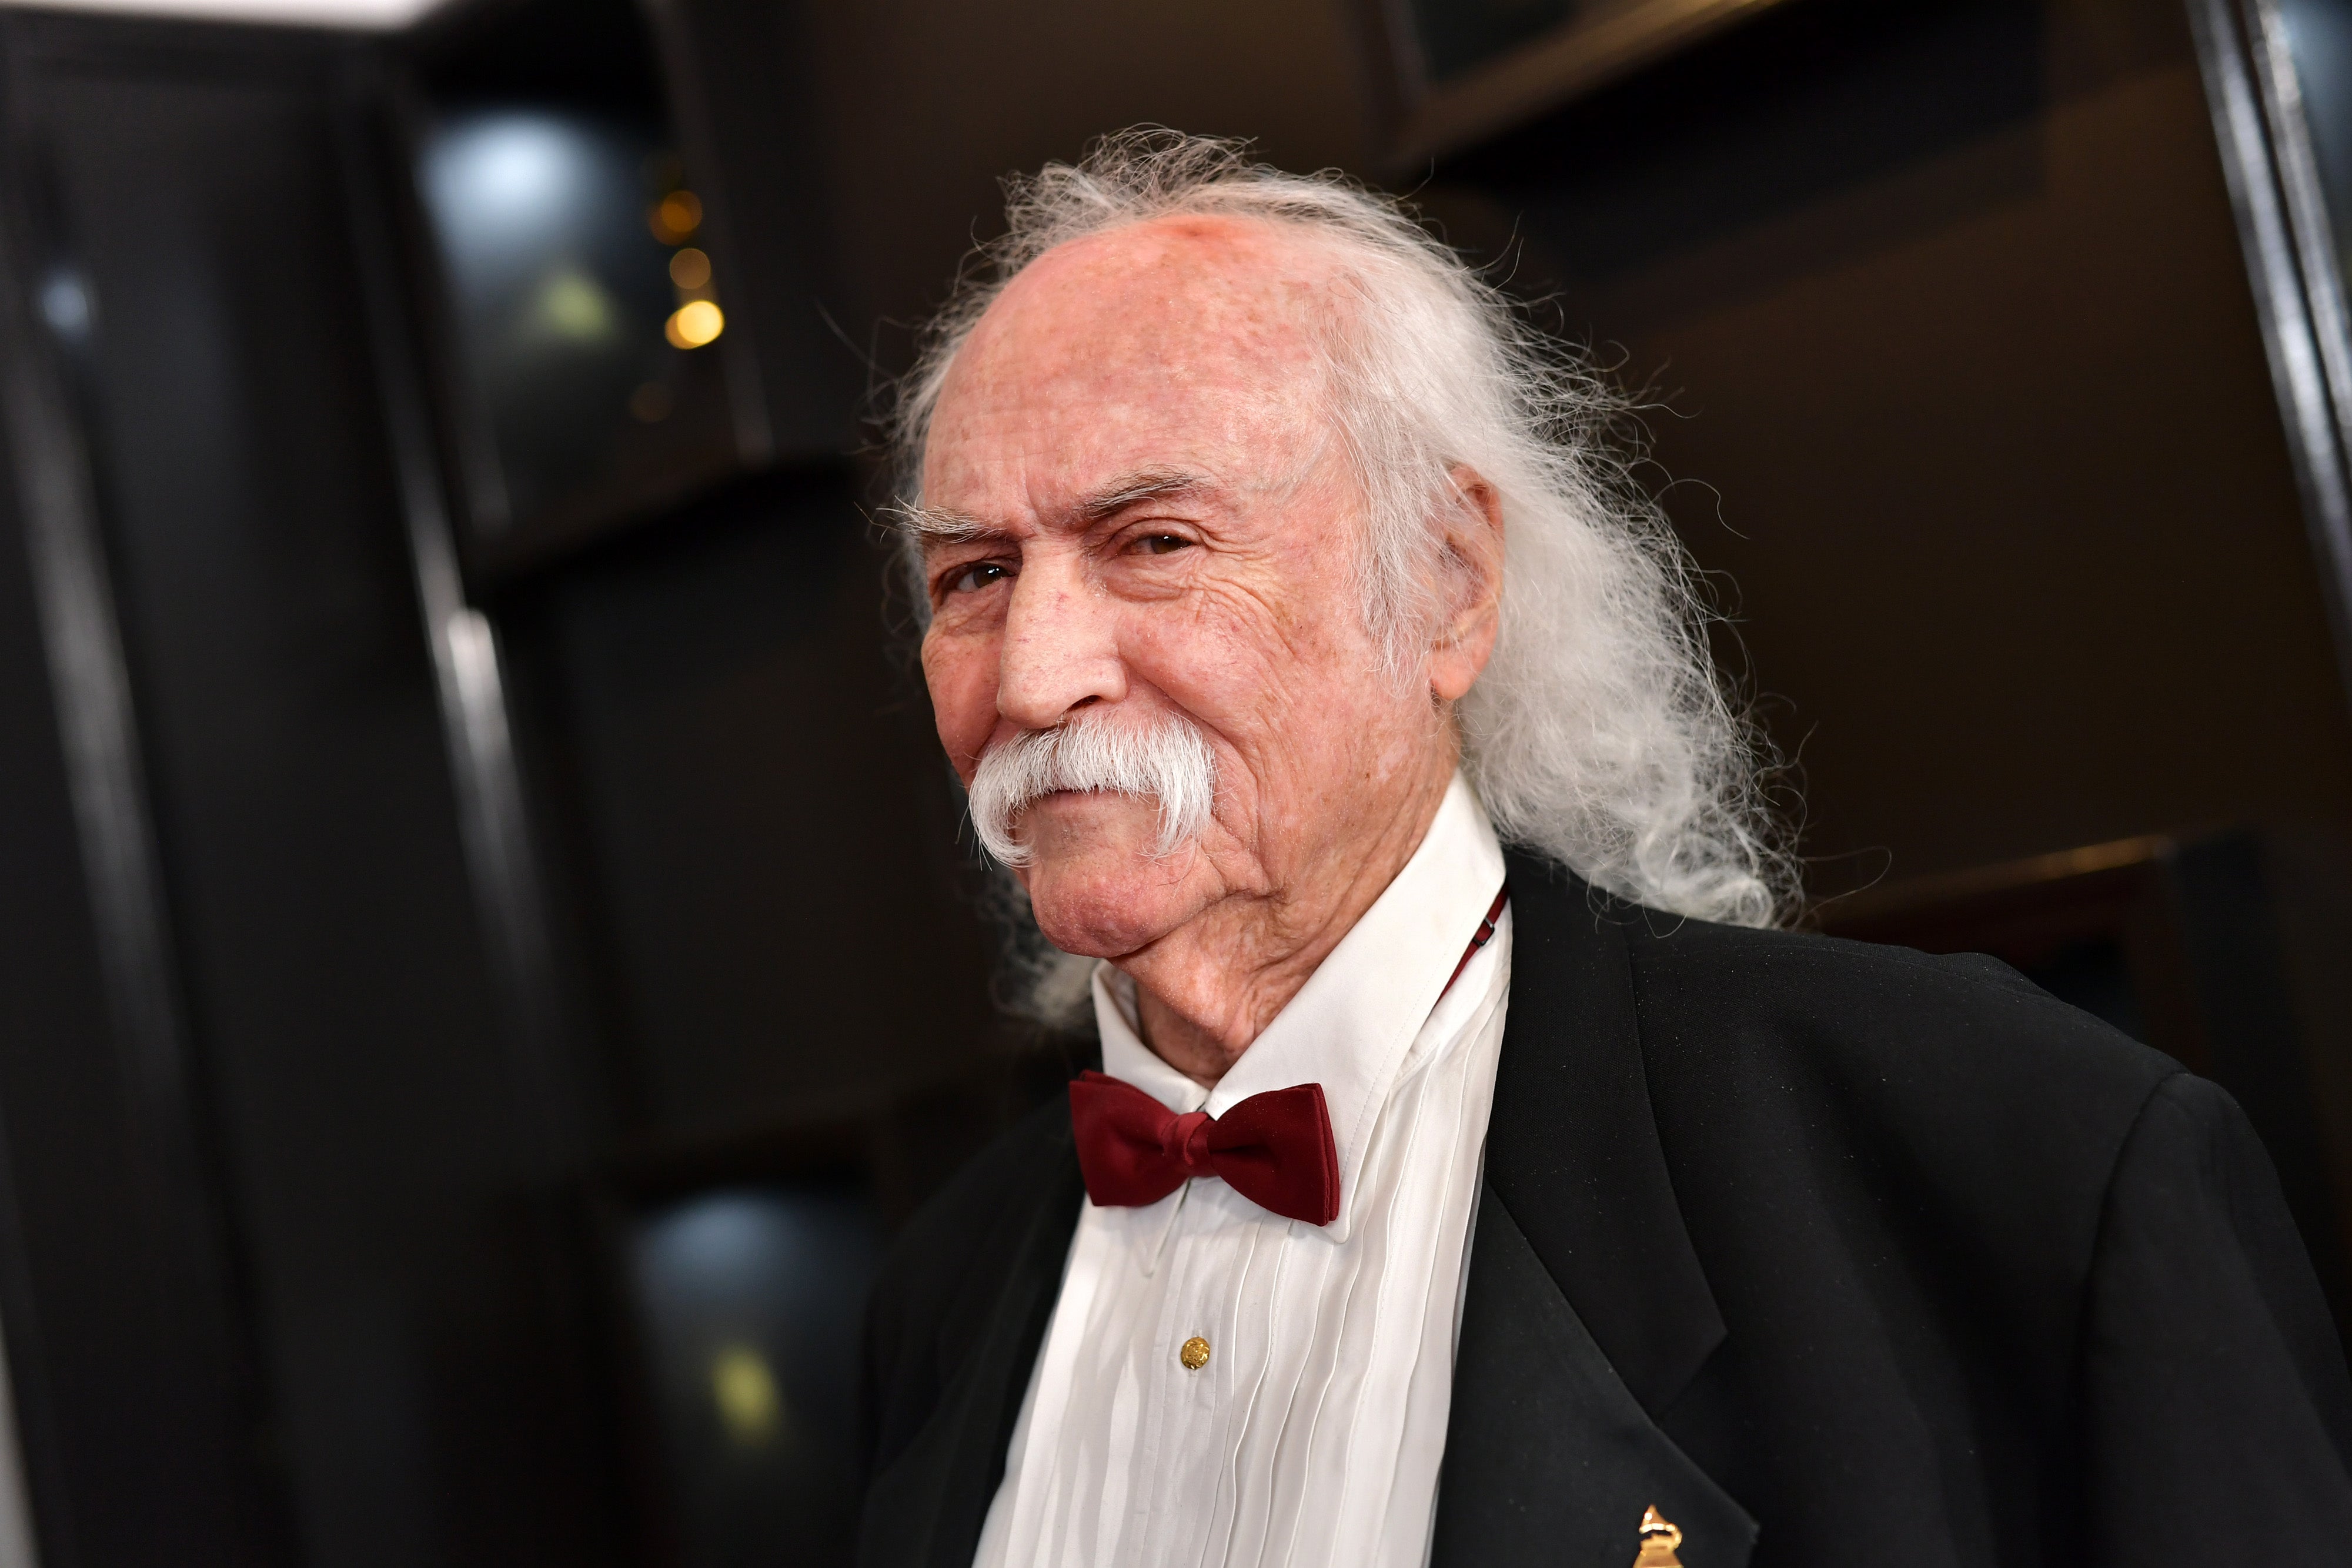 David Crosby at the Grammys on 26 January 2020 in Los Angeles, California